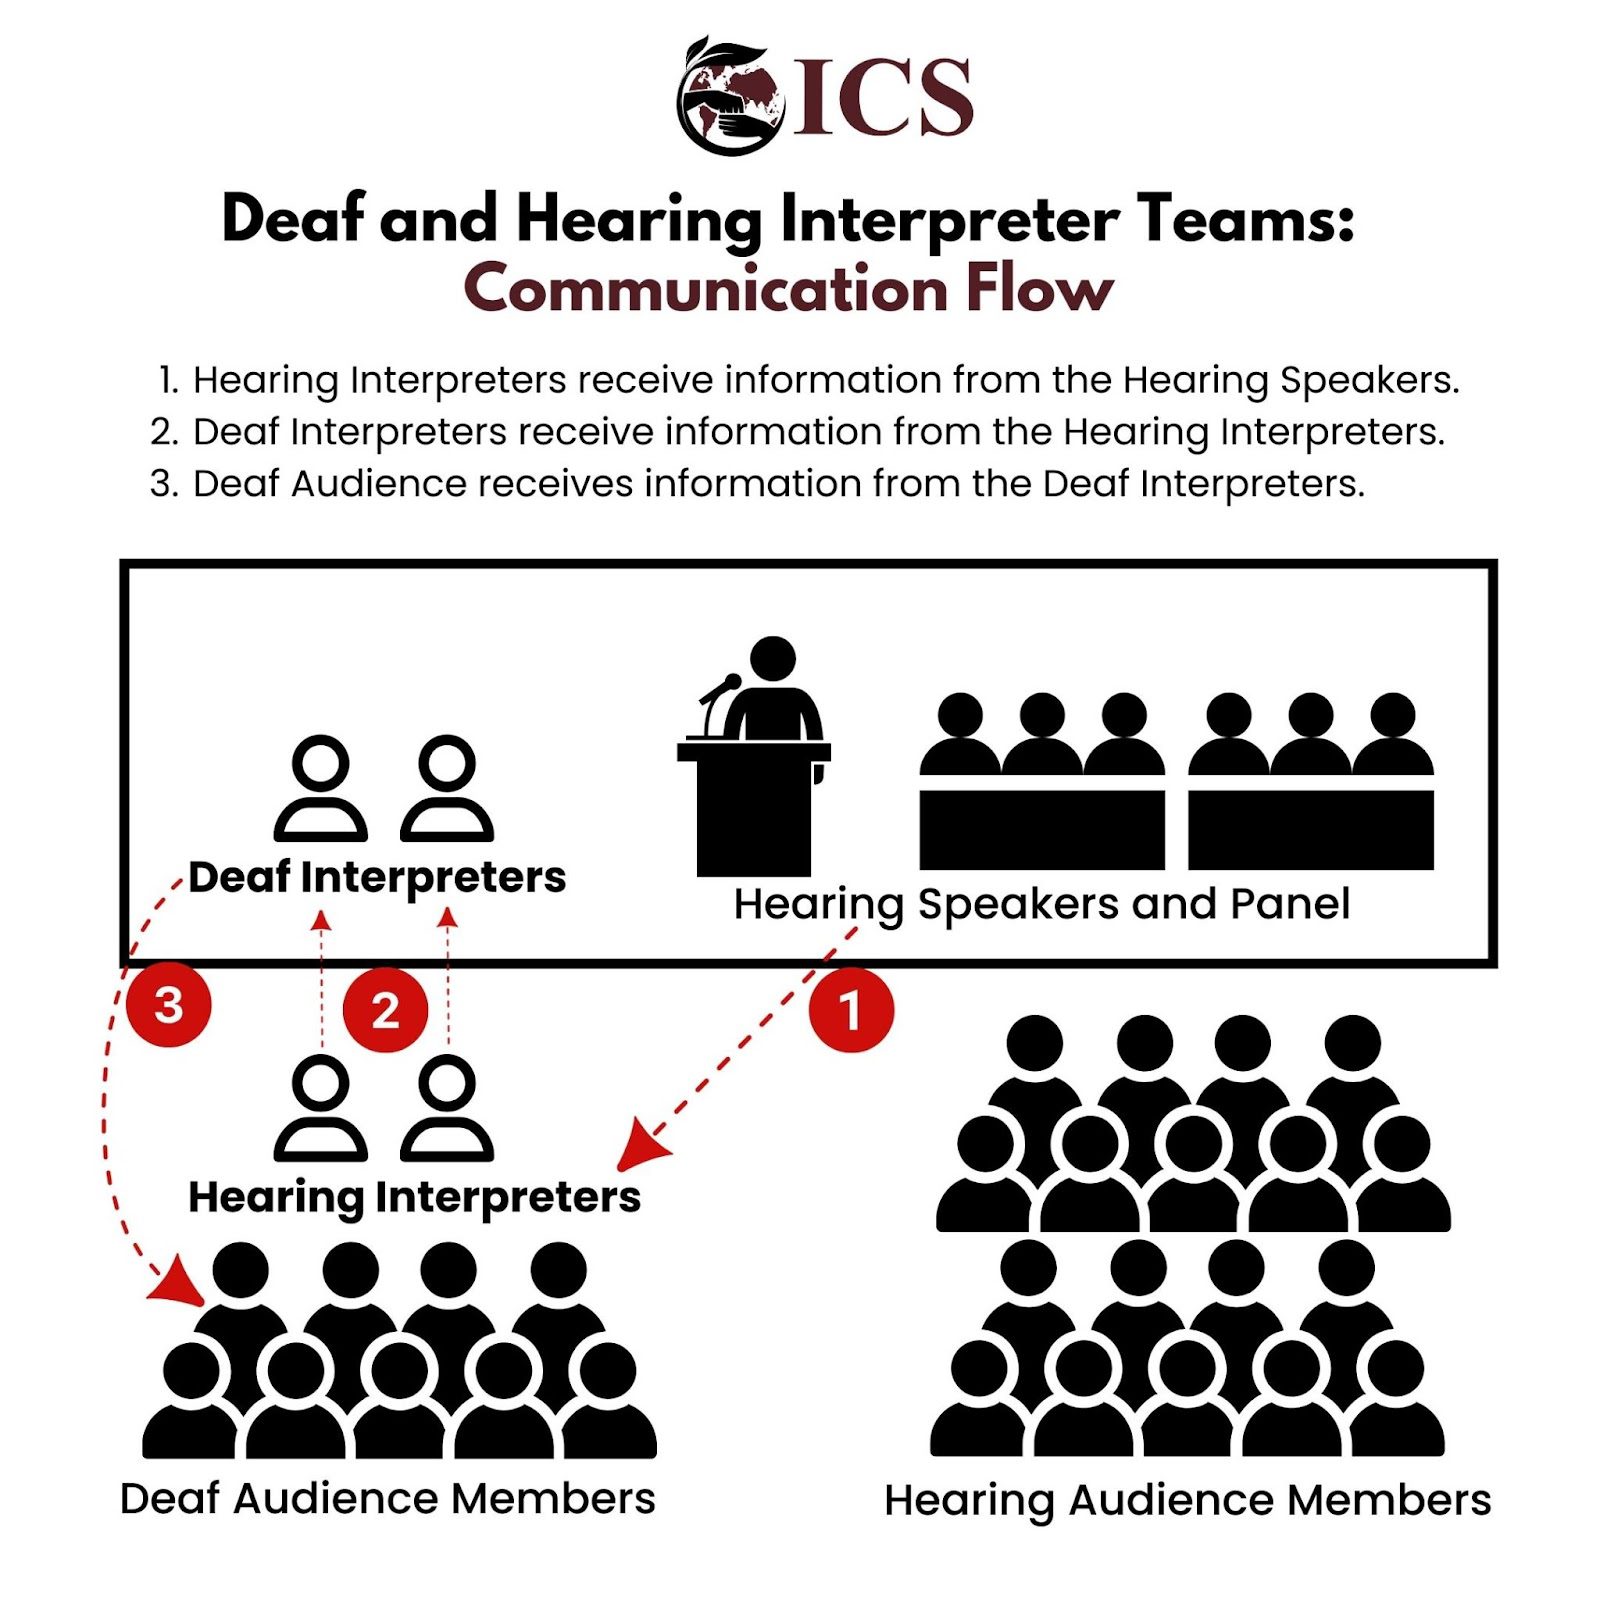 The communication flow for deaf and hearing interpreter teams